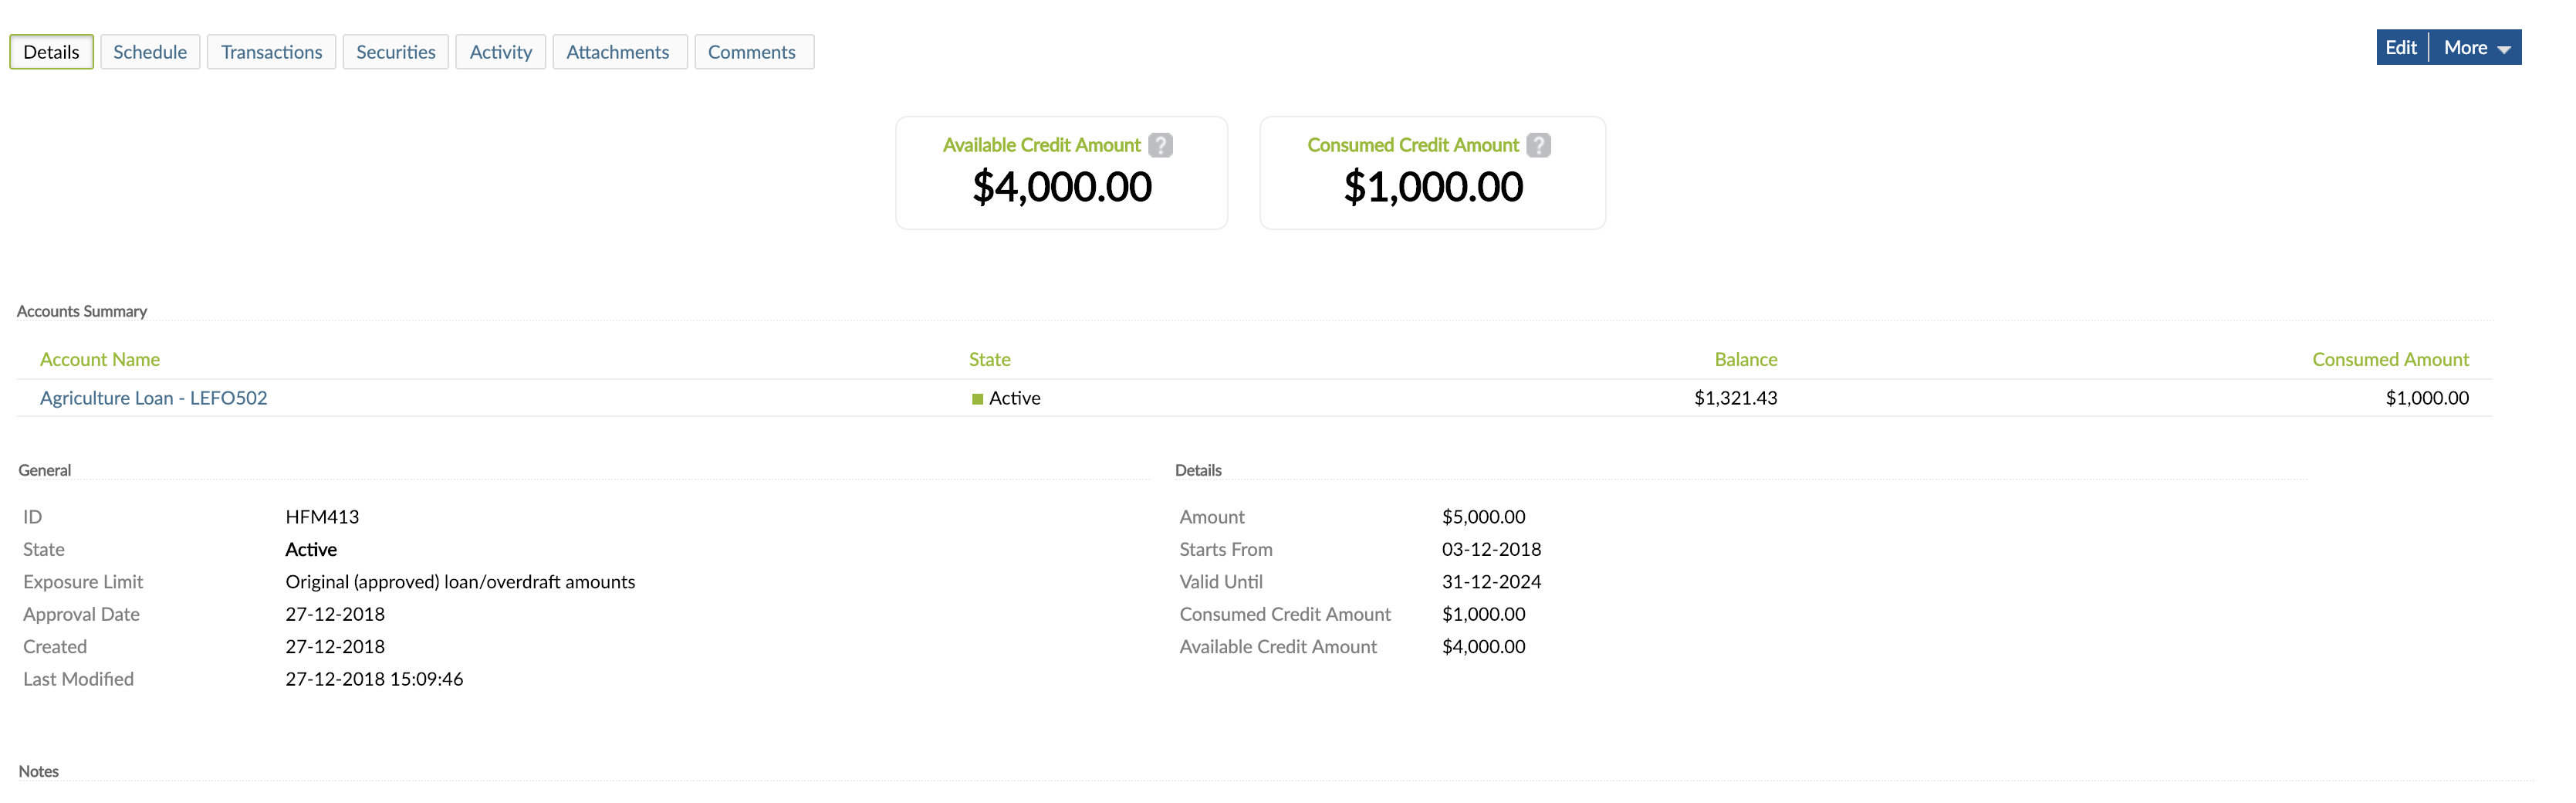 Credit Arrangement view from Details tab